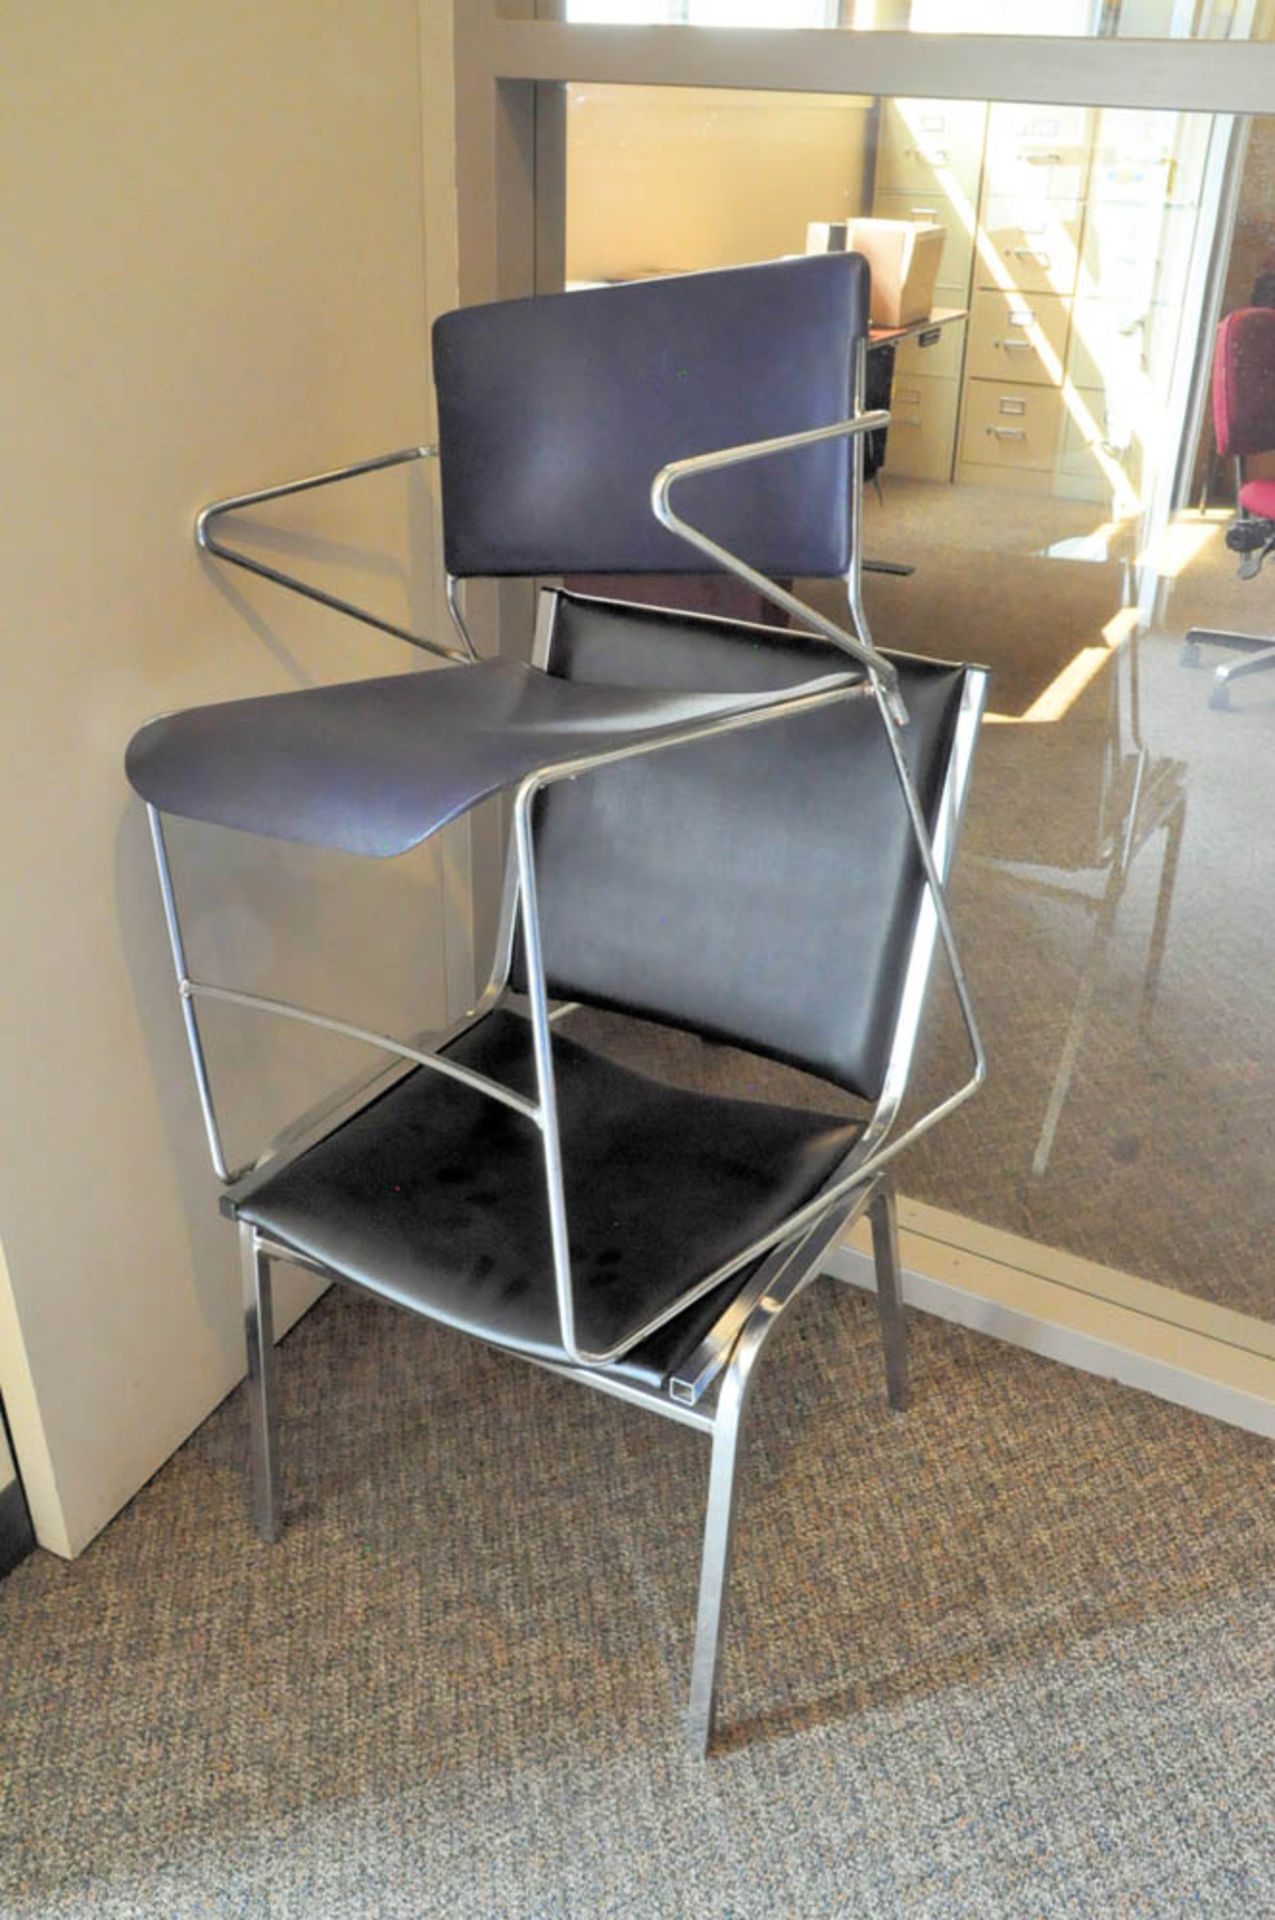 ASSORTED CHAIRS IN RECEPTION AREA - Image 2 of 2